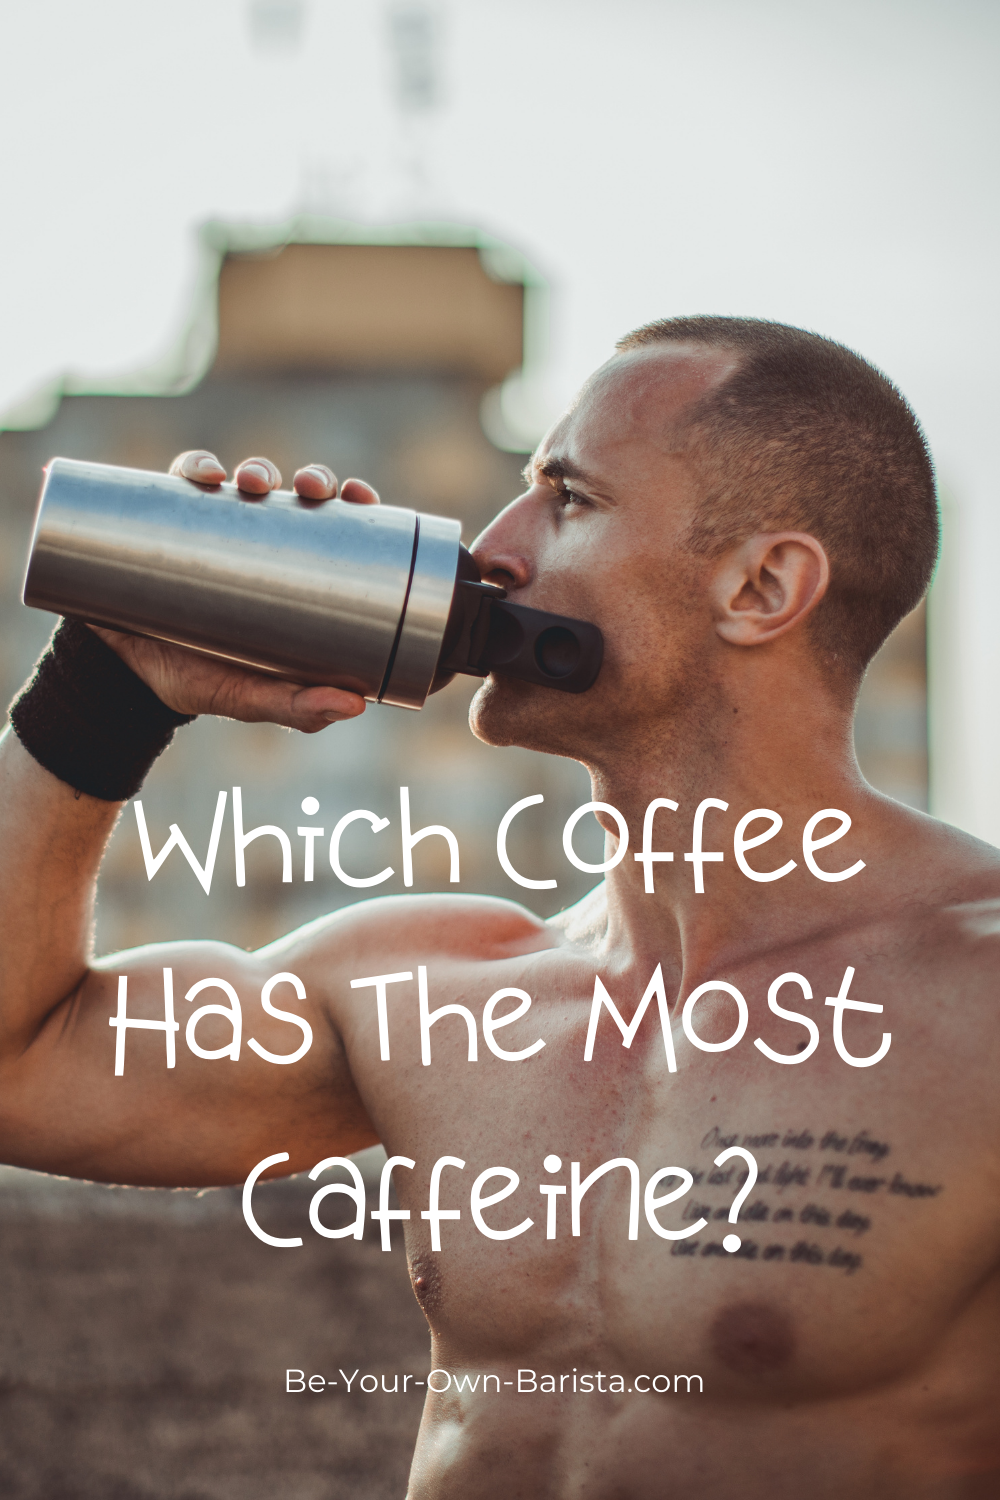 Which Coffee Brand Has the Most Caffeine?